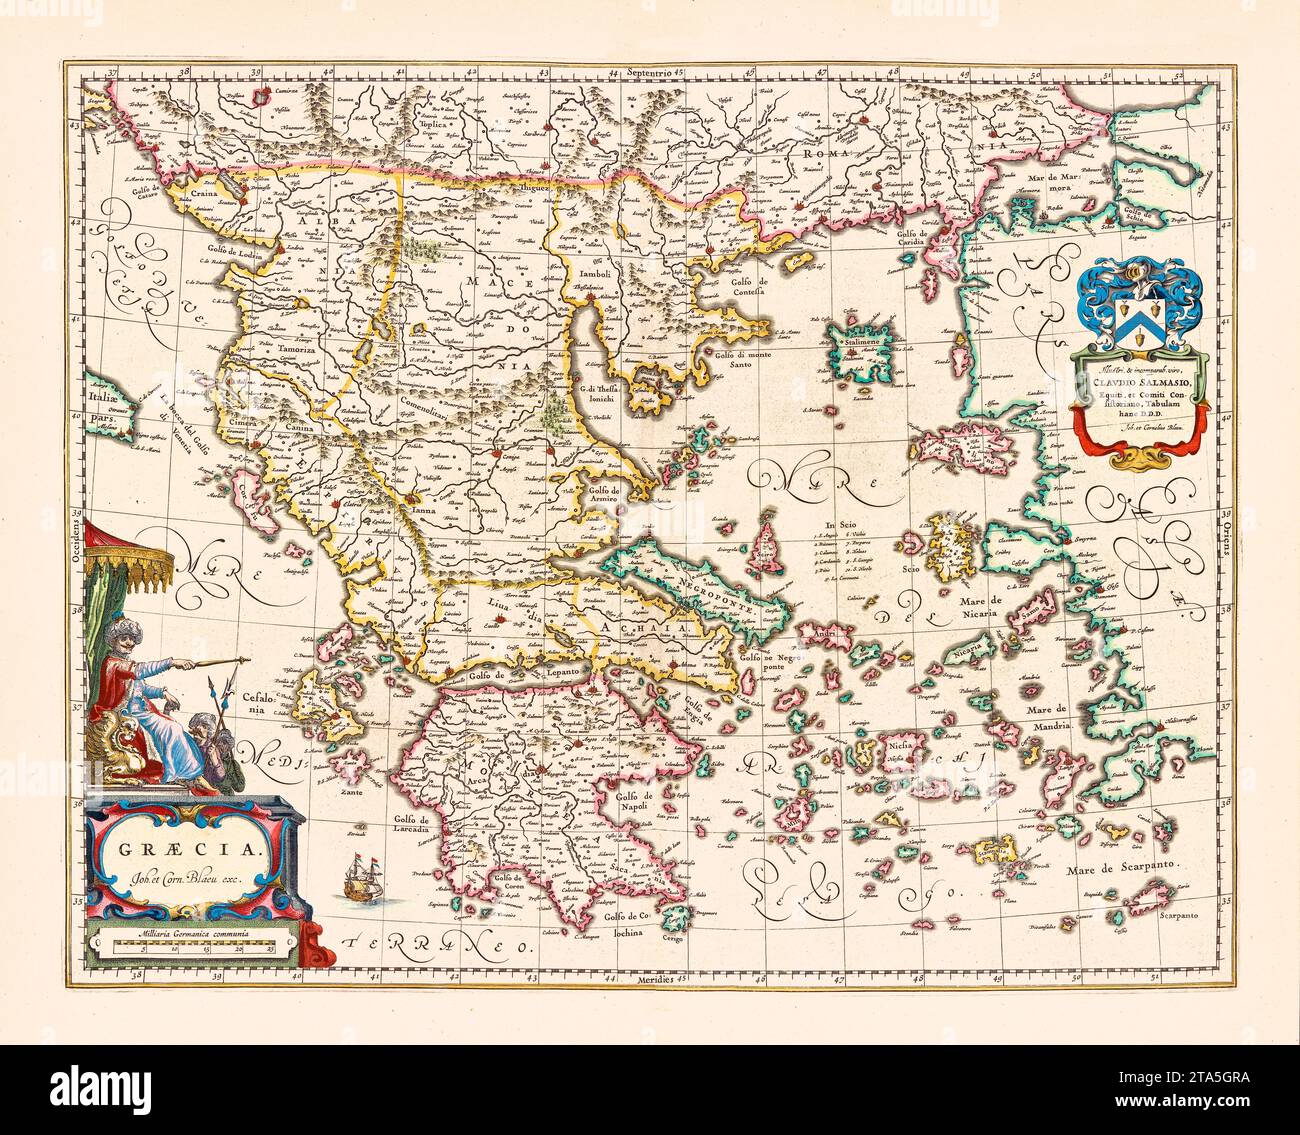 Old map if Greece. By Blaeu, publ. in Amsterdam, ca. 1650 Stock Photo